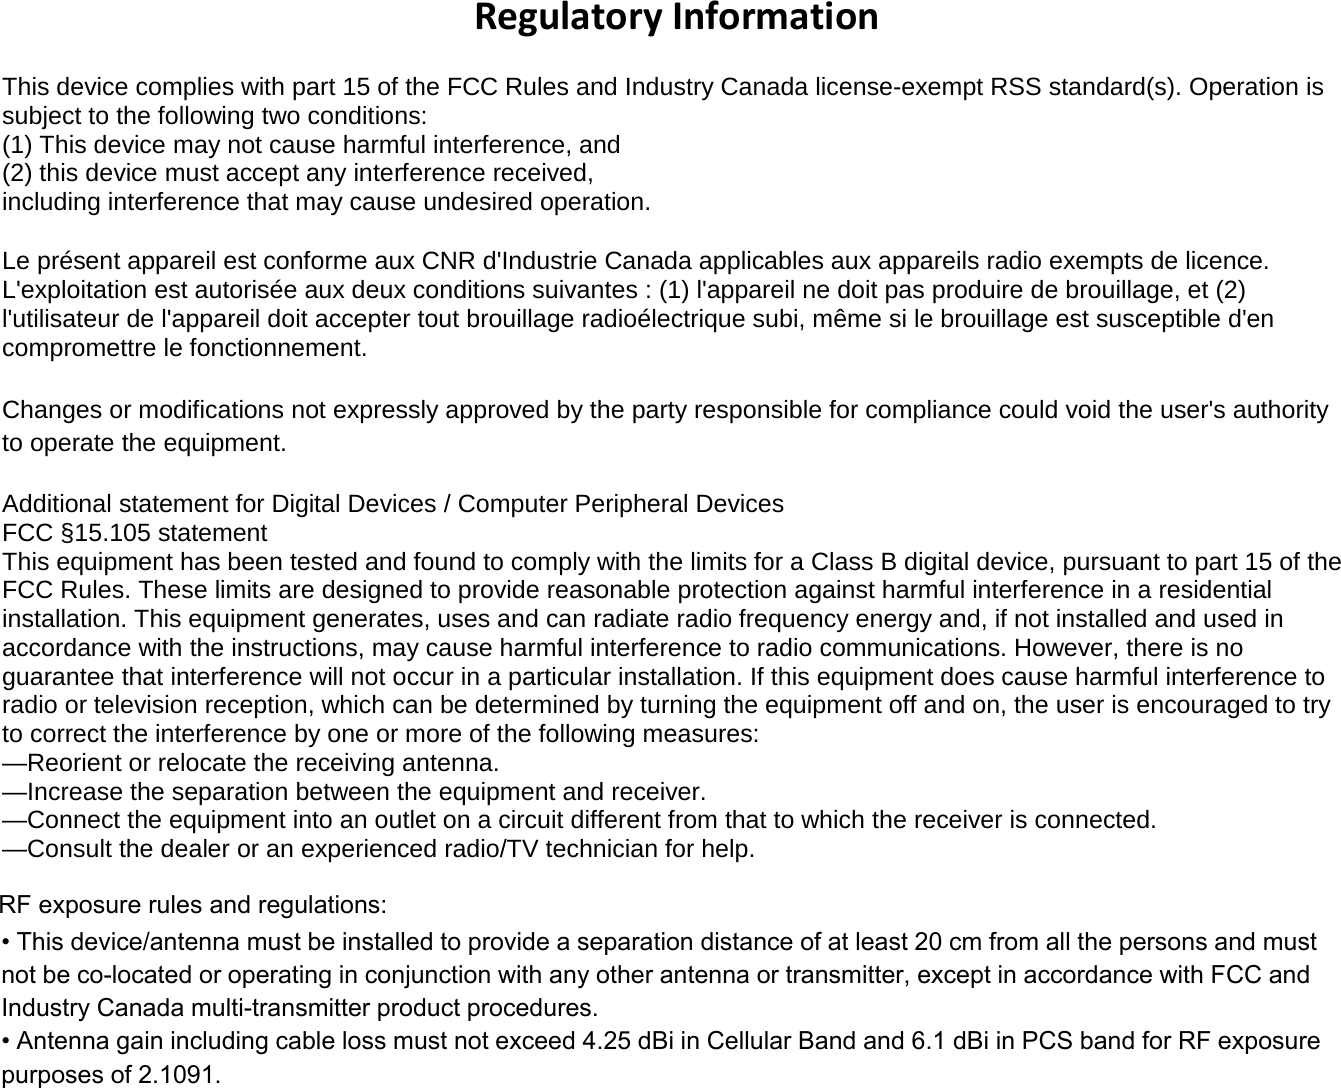 Regulatory Information This device complies with part 15 of the FCC Rules and Industry Canada license-exempt RSS standard(s). Operation is subject to the following two conditions:  (1) This device may not cause harmful interference, and  (2) this device must accept any interference received, including interference that may cause undesired operation. Le présent appareil est conforme aux CNR d&apos;Industrie Canada applicables aux appareils radio exempts de licence. L&apos;exploitation est autorisée aux deux conditions suivantes : (1) l&apos;appareil ne doit pas produire de brouillage, et (2) l&apos;utilisateur de l&apos;appareil doit accepter tout brouillage radioélectrique subi, même si le brouillage est susceptible d&apos;en compromettre le fonctionnement. Changes or modifications not expressly approved by the party responsible for compliance could void the user&apos;s authority to operate the equipment. Additional statement for Digital Devices / Computer Peripheral Devices FCC §15.105 statement This equipment has been tested and found to comply with the limits for a Class B digital device, pursuant to part 15 of the FCC Rules. These limits are designed to provide reasonable protection against harmful interference in a residential installation. This equipment generates, uses and can radiate radio frequency energy and, if not installed and used in accordance with the instructions, may cause harmful interference to radio communications. However, there is no guarantee that interference will not occur in a particular installation. If this equipment does cause harmful interference to radio or television reception, which can be determined by turning the equipment off and on, the user is encouraged to try to correct the interference by one or more of the following measures: —Reorient or relocate the receiving antenna. —Increase the separation between the equipment and receiver. —Connect the equipment into an outlet on a circuit different from that to which the receiver is connected.  —Consult the dealer or an experienced radio/TV technician for help. • This device/antenna must be installed to provide a separation distance of at least 20 cm from all the persons and mustnot be co-located or operating in conjunction with any other antenna or transmitter, except in accordance with FCC and Industry Canada multi-transmitter product procedures. • Antenna gain including cable loss must not exceed 4.25 dBi in Cellular Band and 6.1 dBi in PCS band for RF exposurepurposes of 2.1091.RF exposure rules and regulations: 